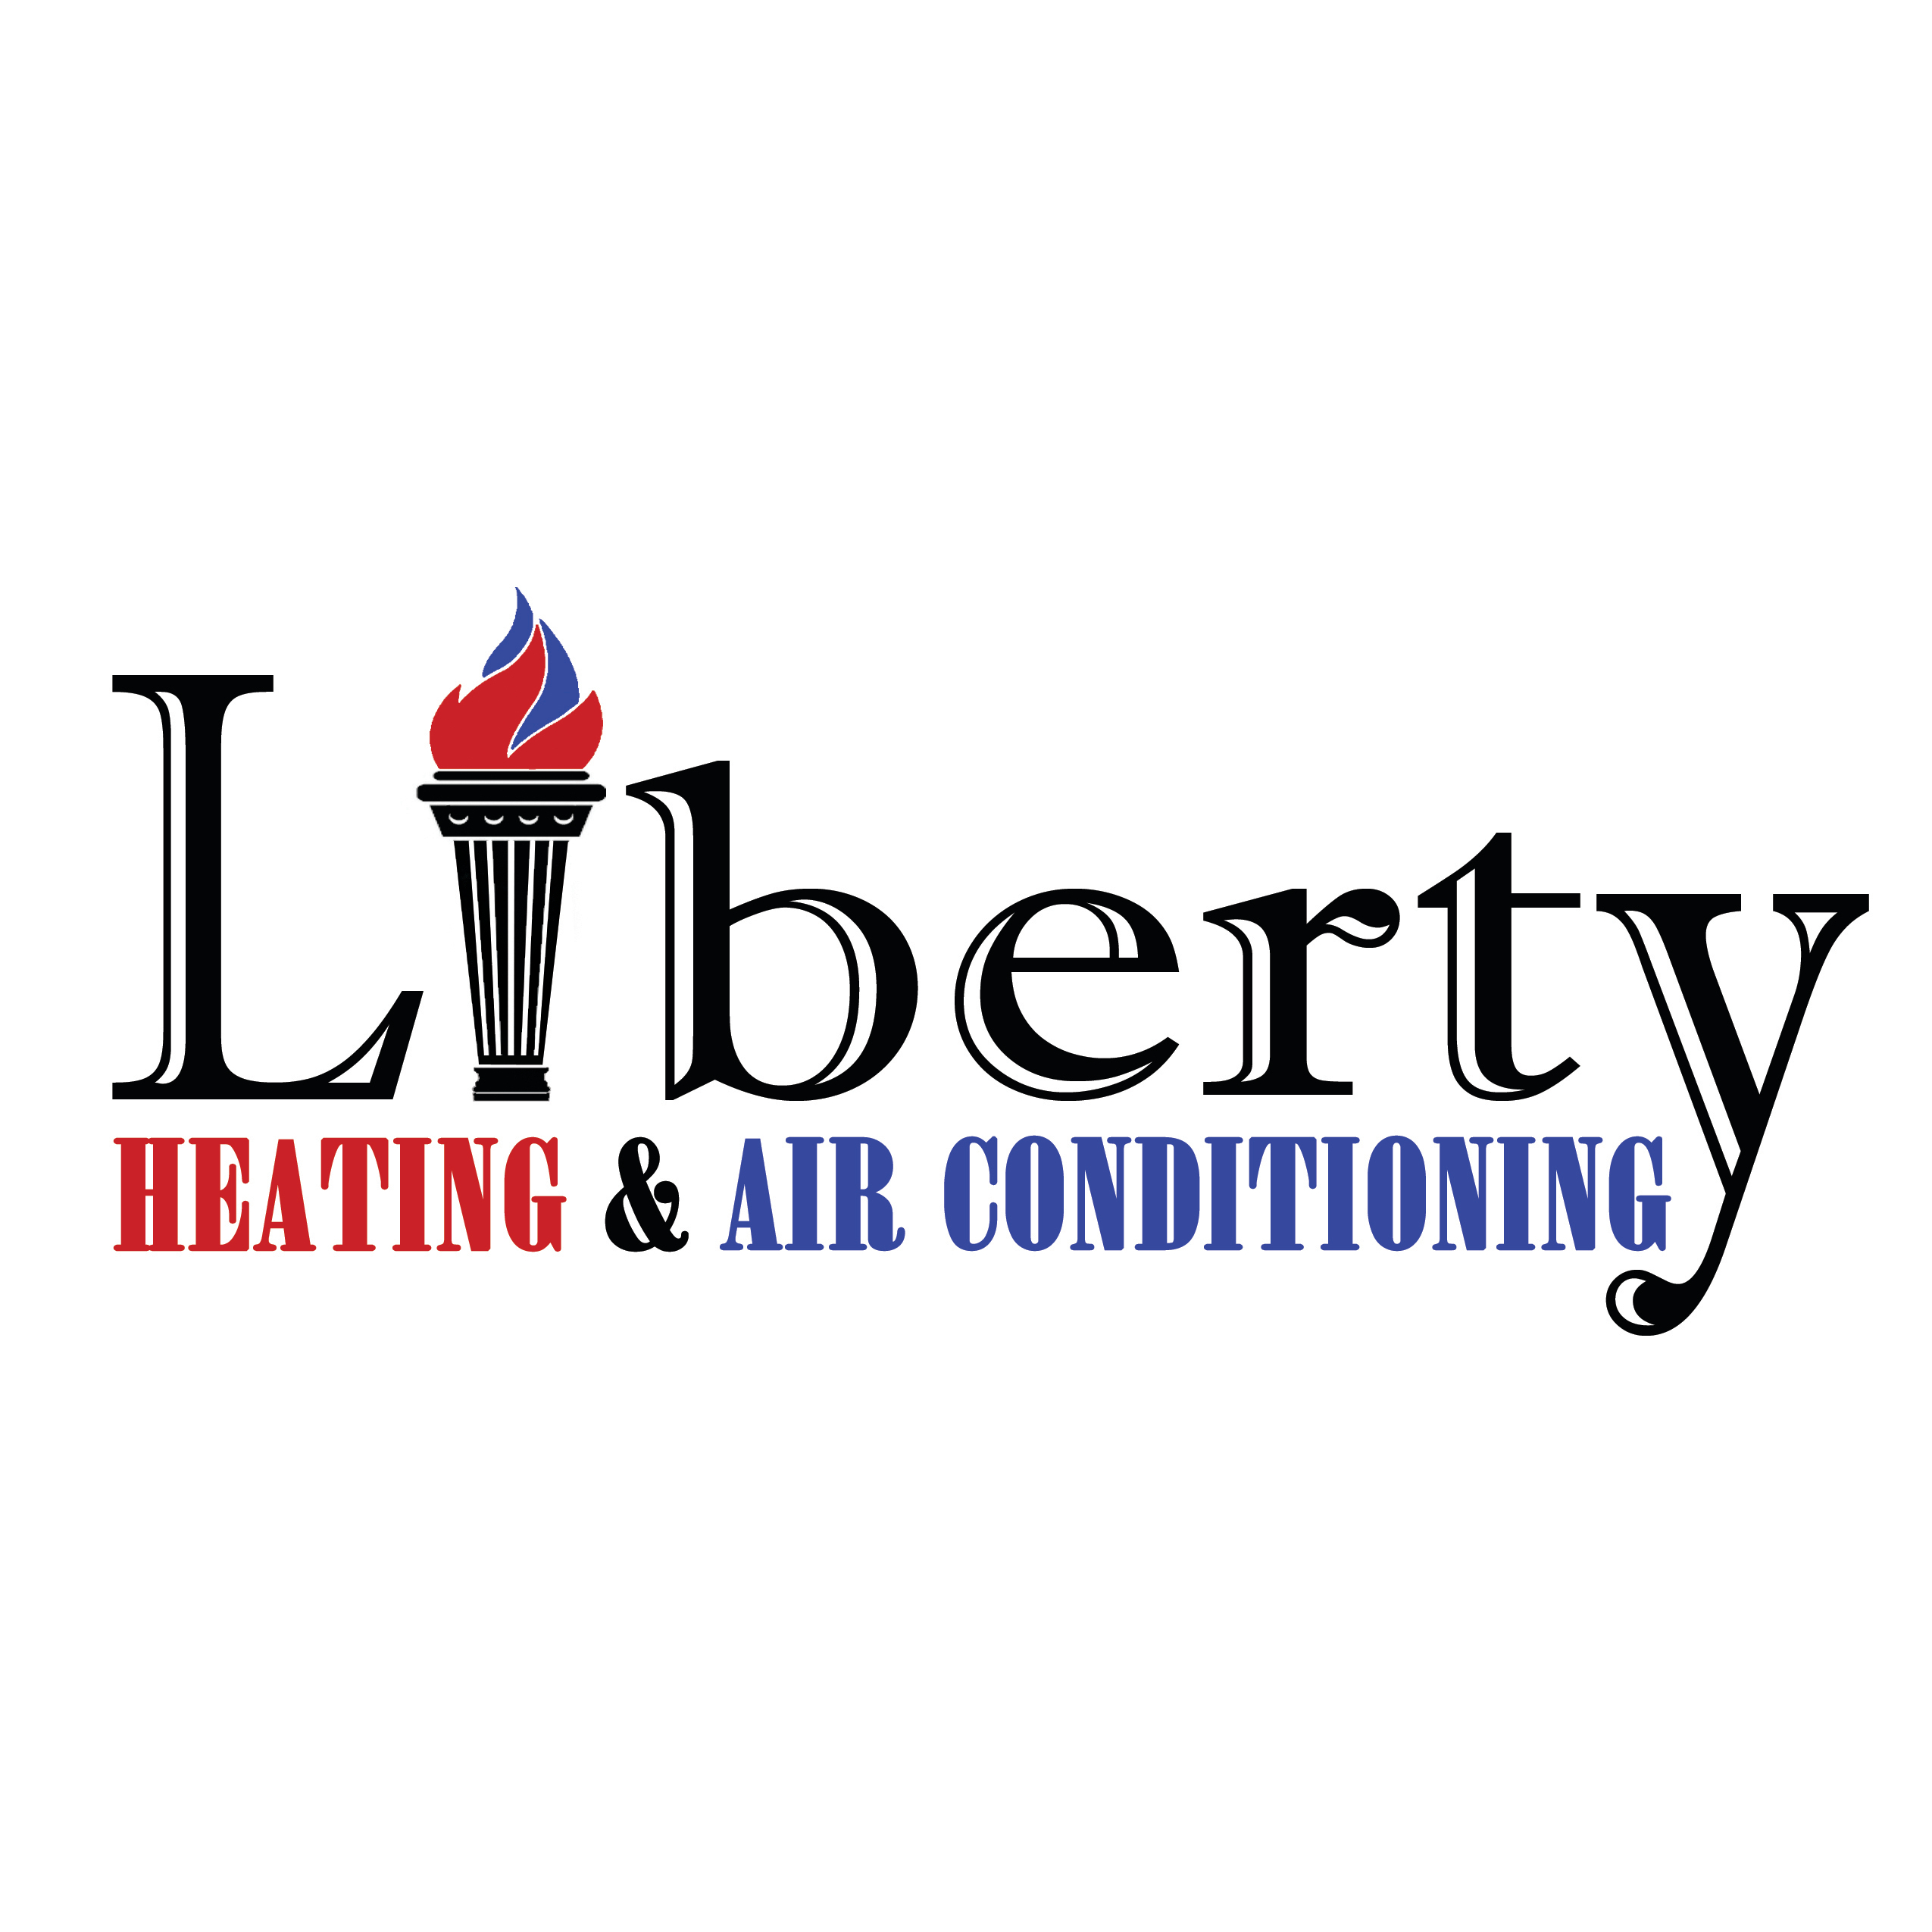 Heating And Air Conditioning: Heating And Air Conditioning ...